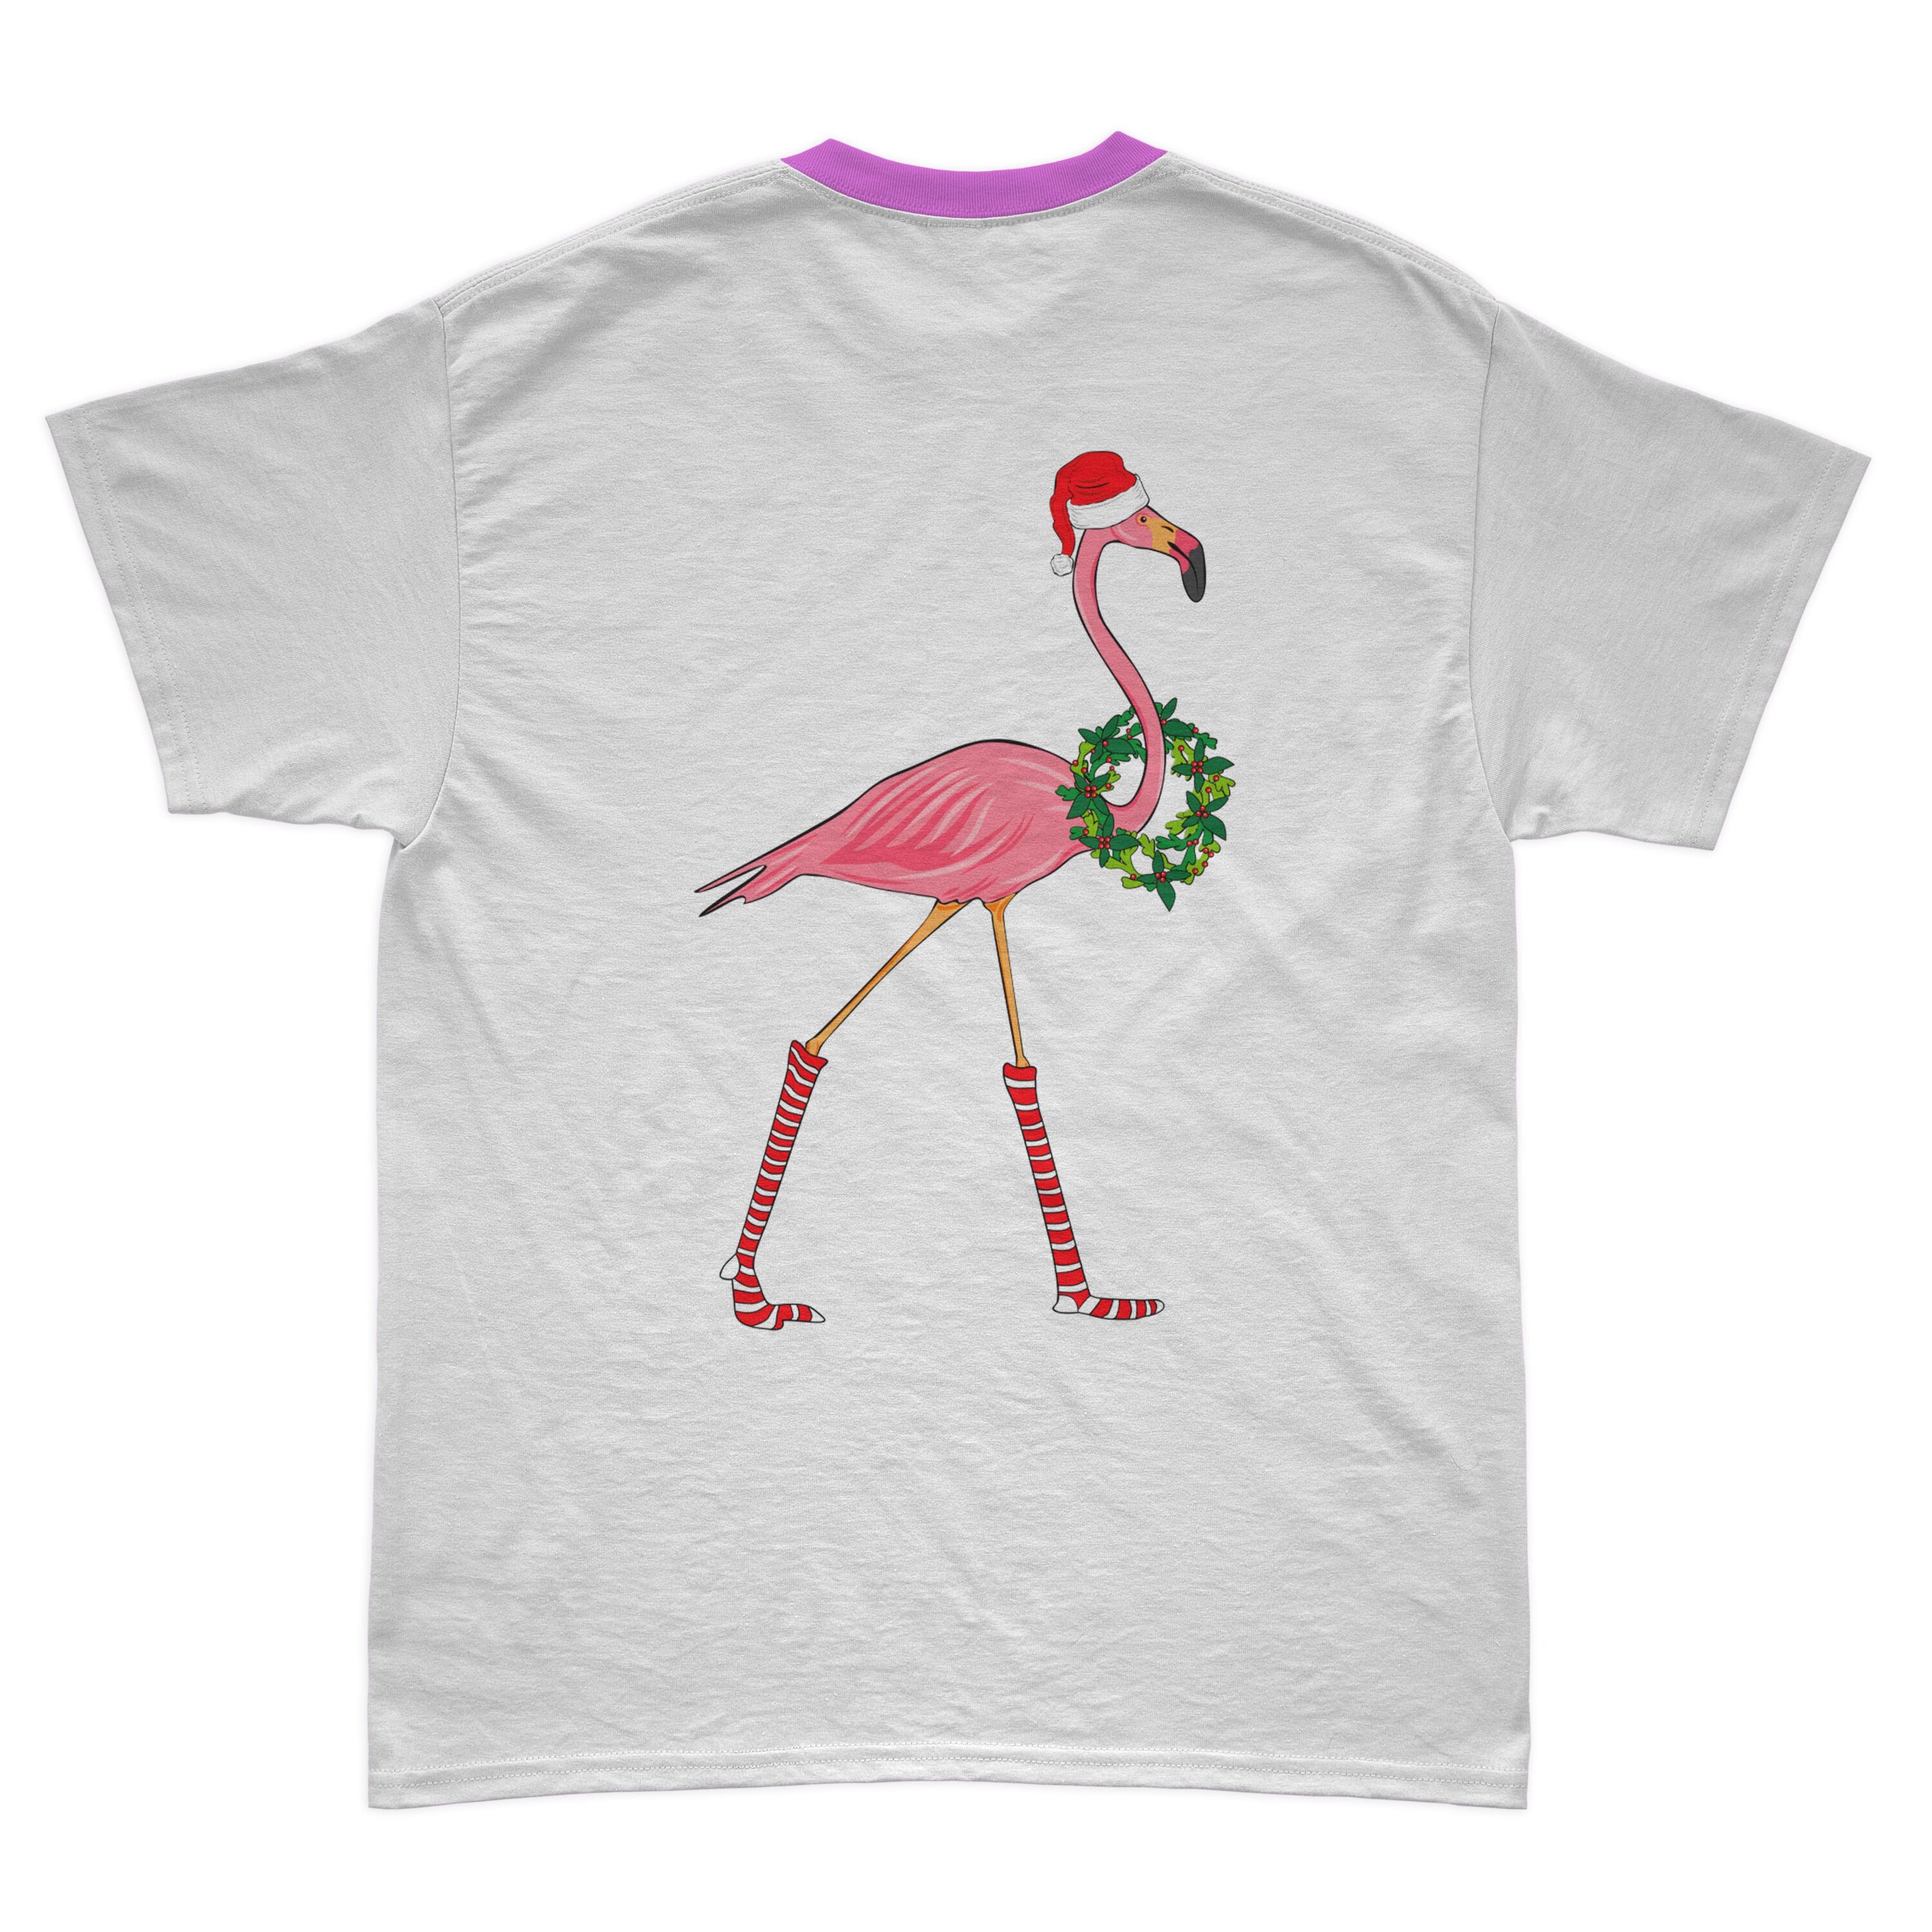 Festive flamingo is ready for the Christmas party.